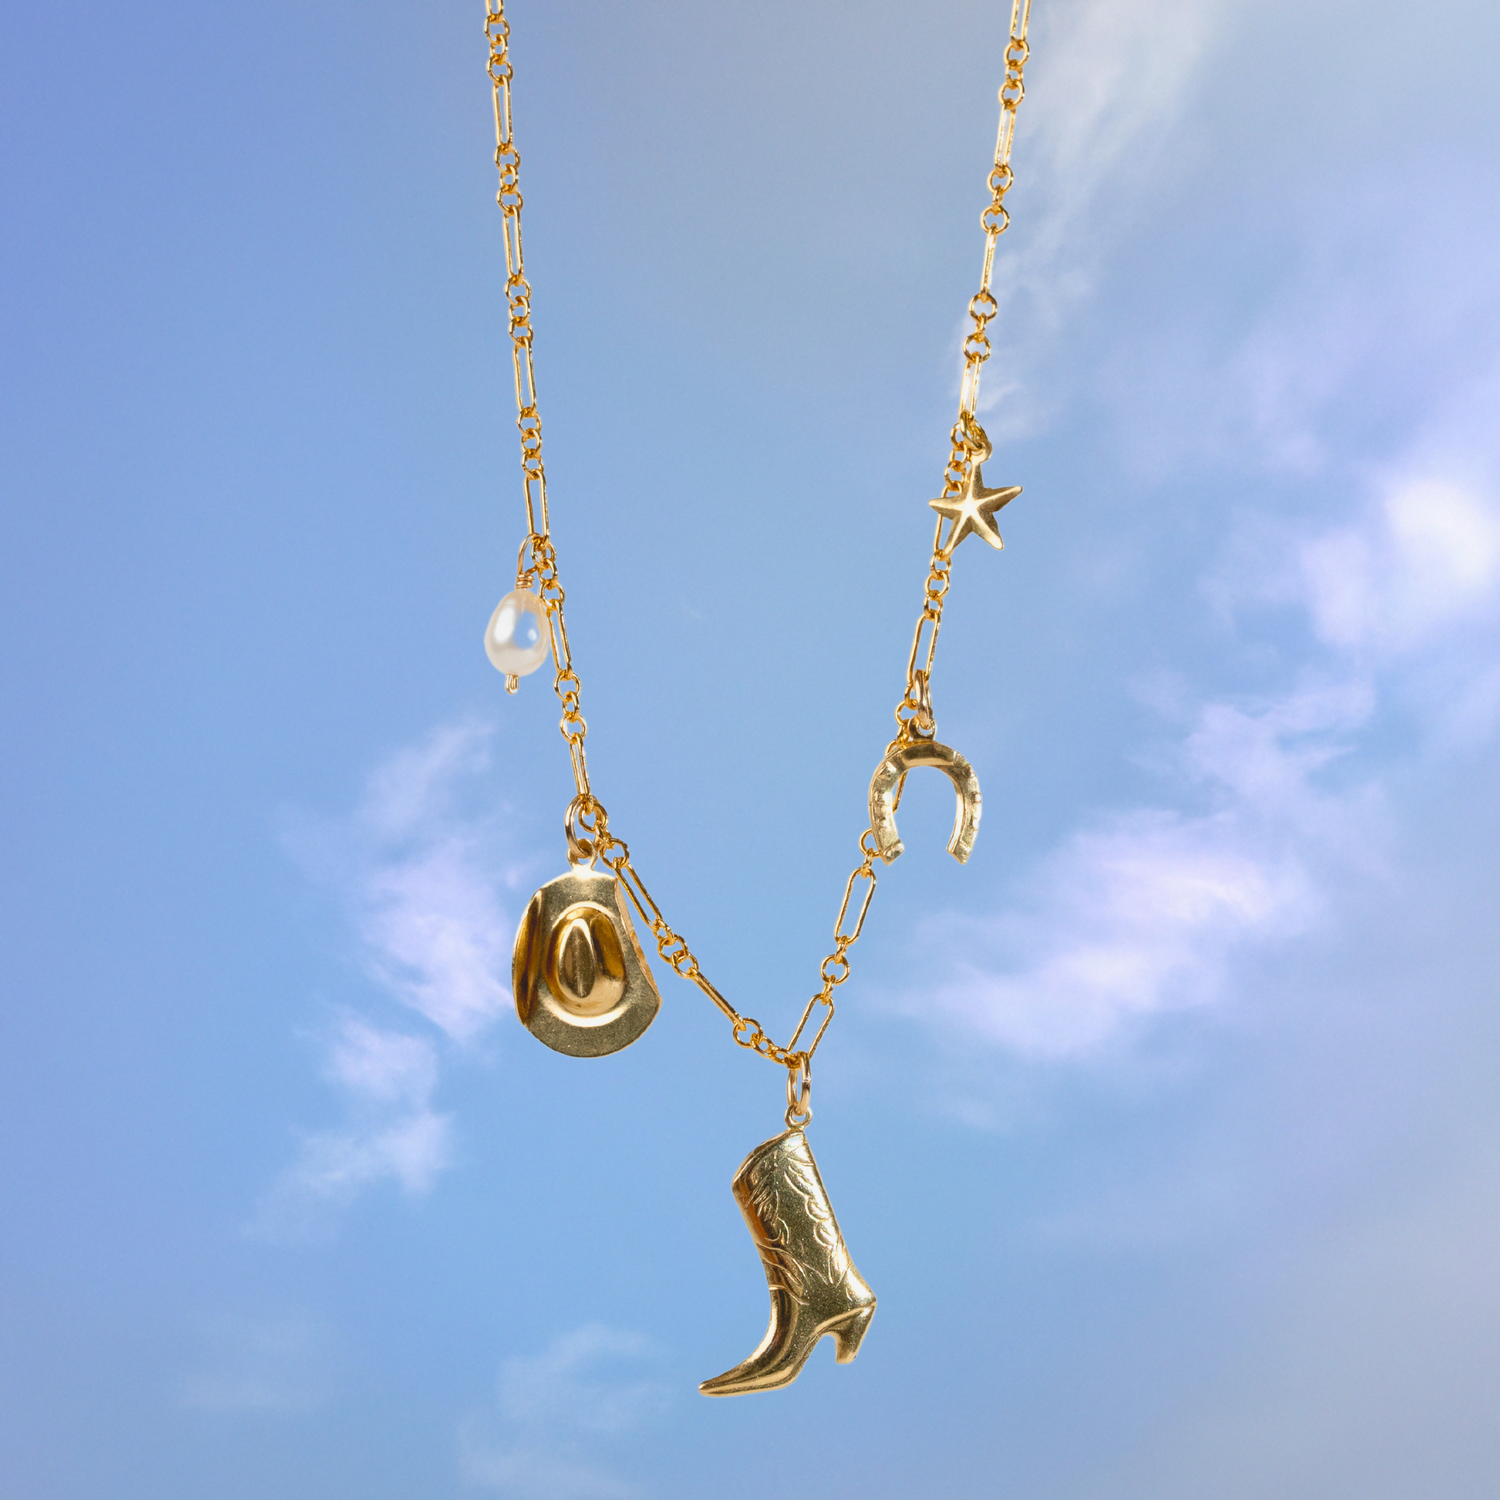 Stampede Charm Necklace by Quinney Collection 14k Gold Filled jewelry. Made in Victoria BC Canada